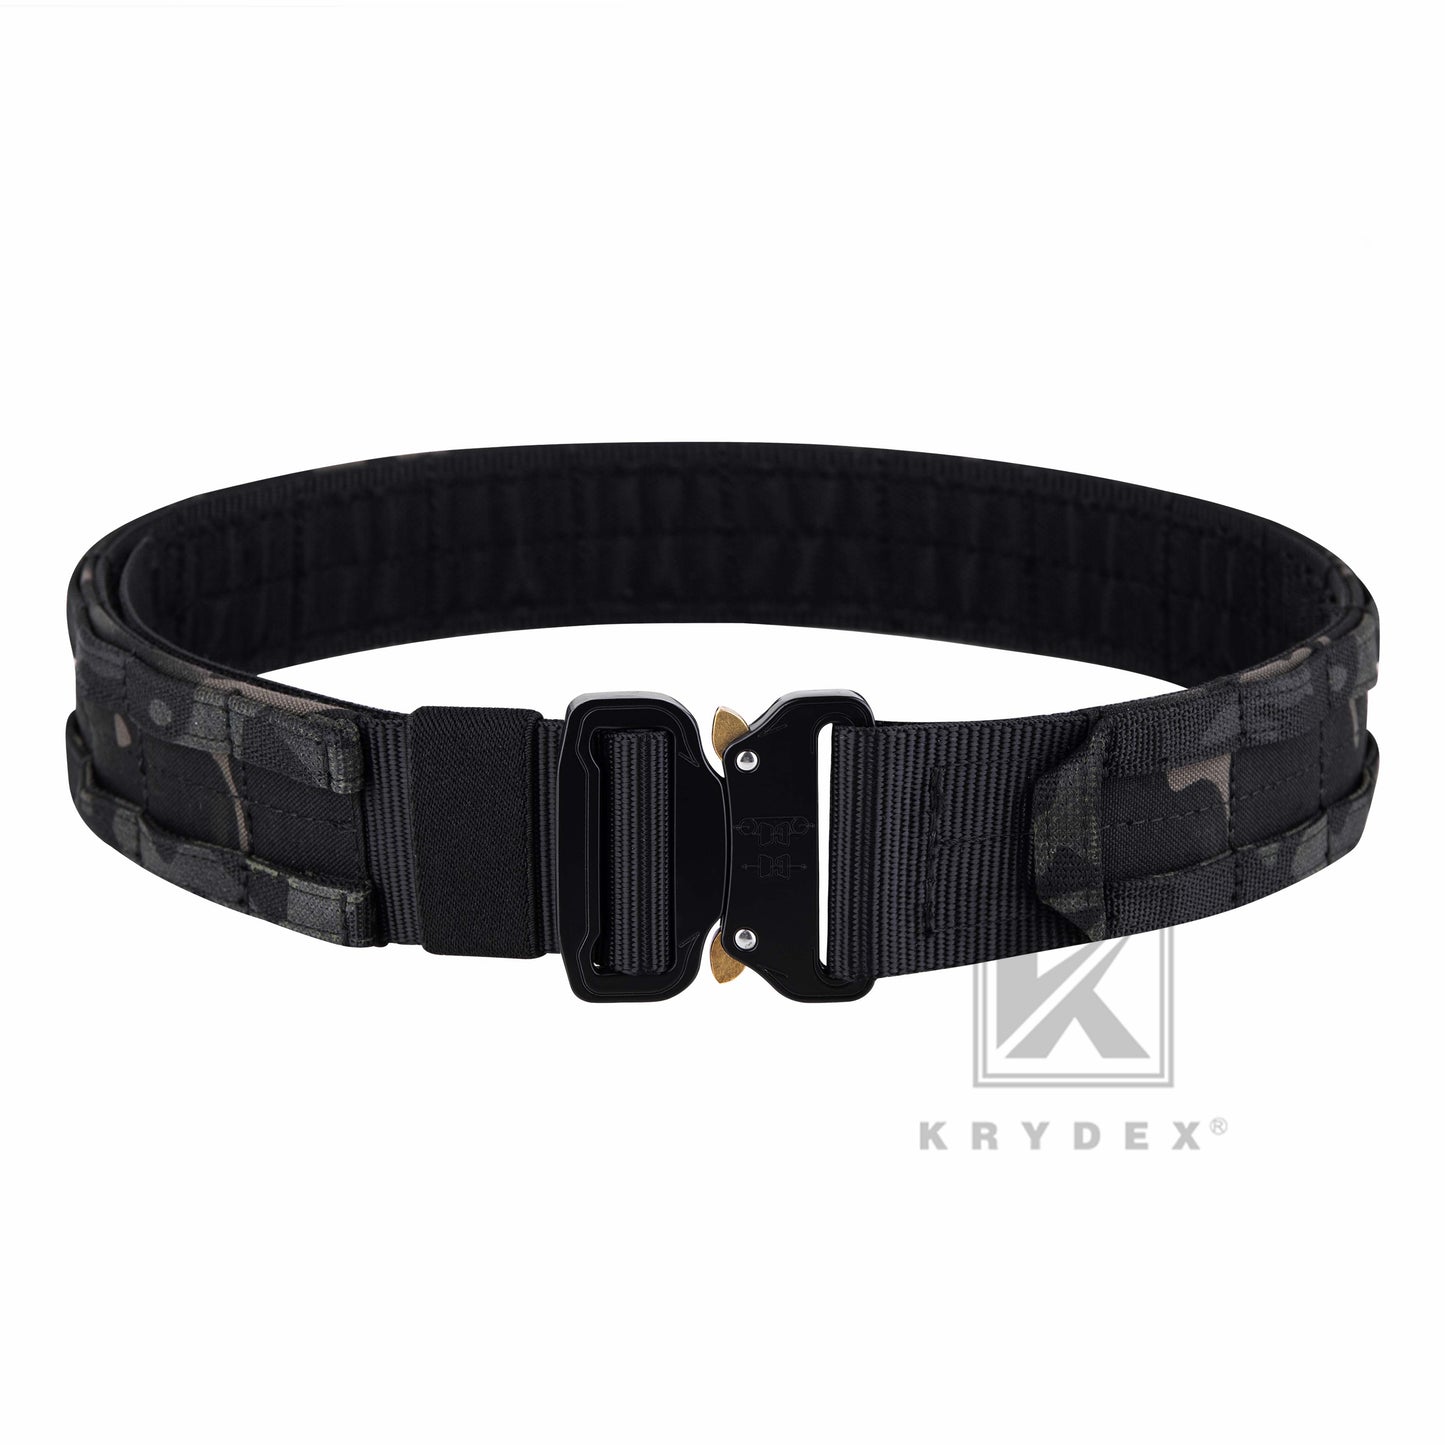 KRYDEX Quick Release 1.5"-1.75" Heavy Duty Metal Buckle Molle Rigger Outer & Inner Belt Military Airsoft Battle Tactical Outdoor Adjustable Waistband